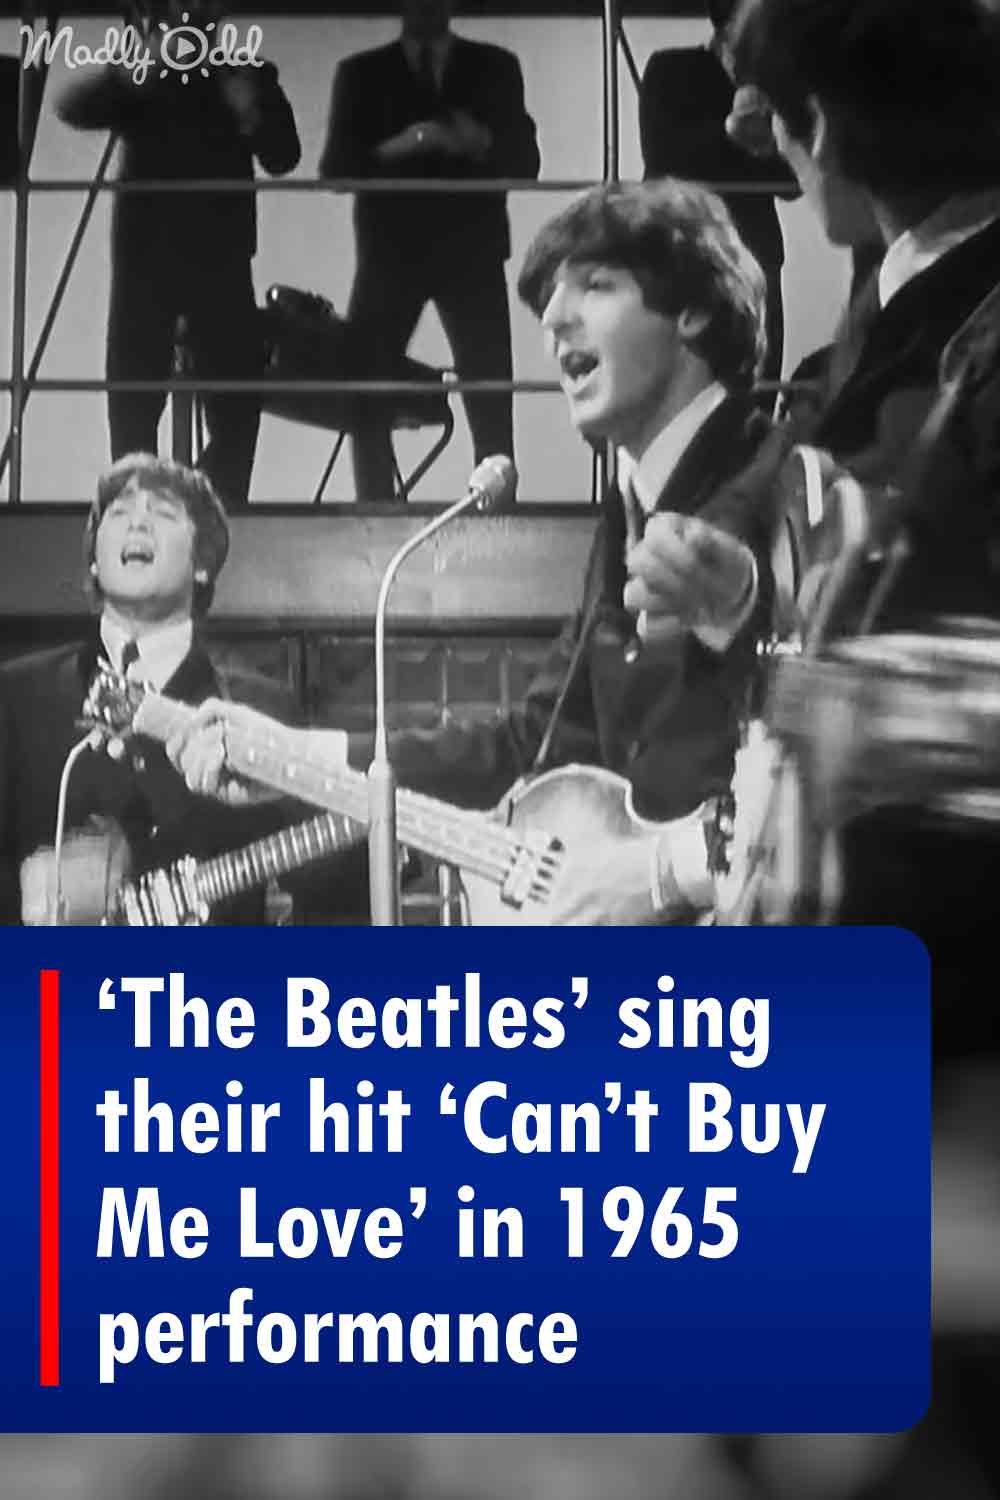 ‘The Beatles’ sing their hit ‘Can’t Buy Me Love’ in 1965 performance